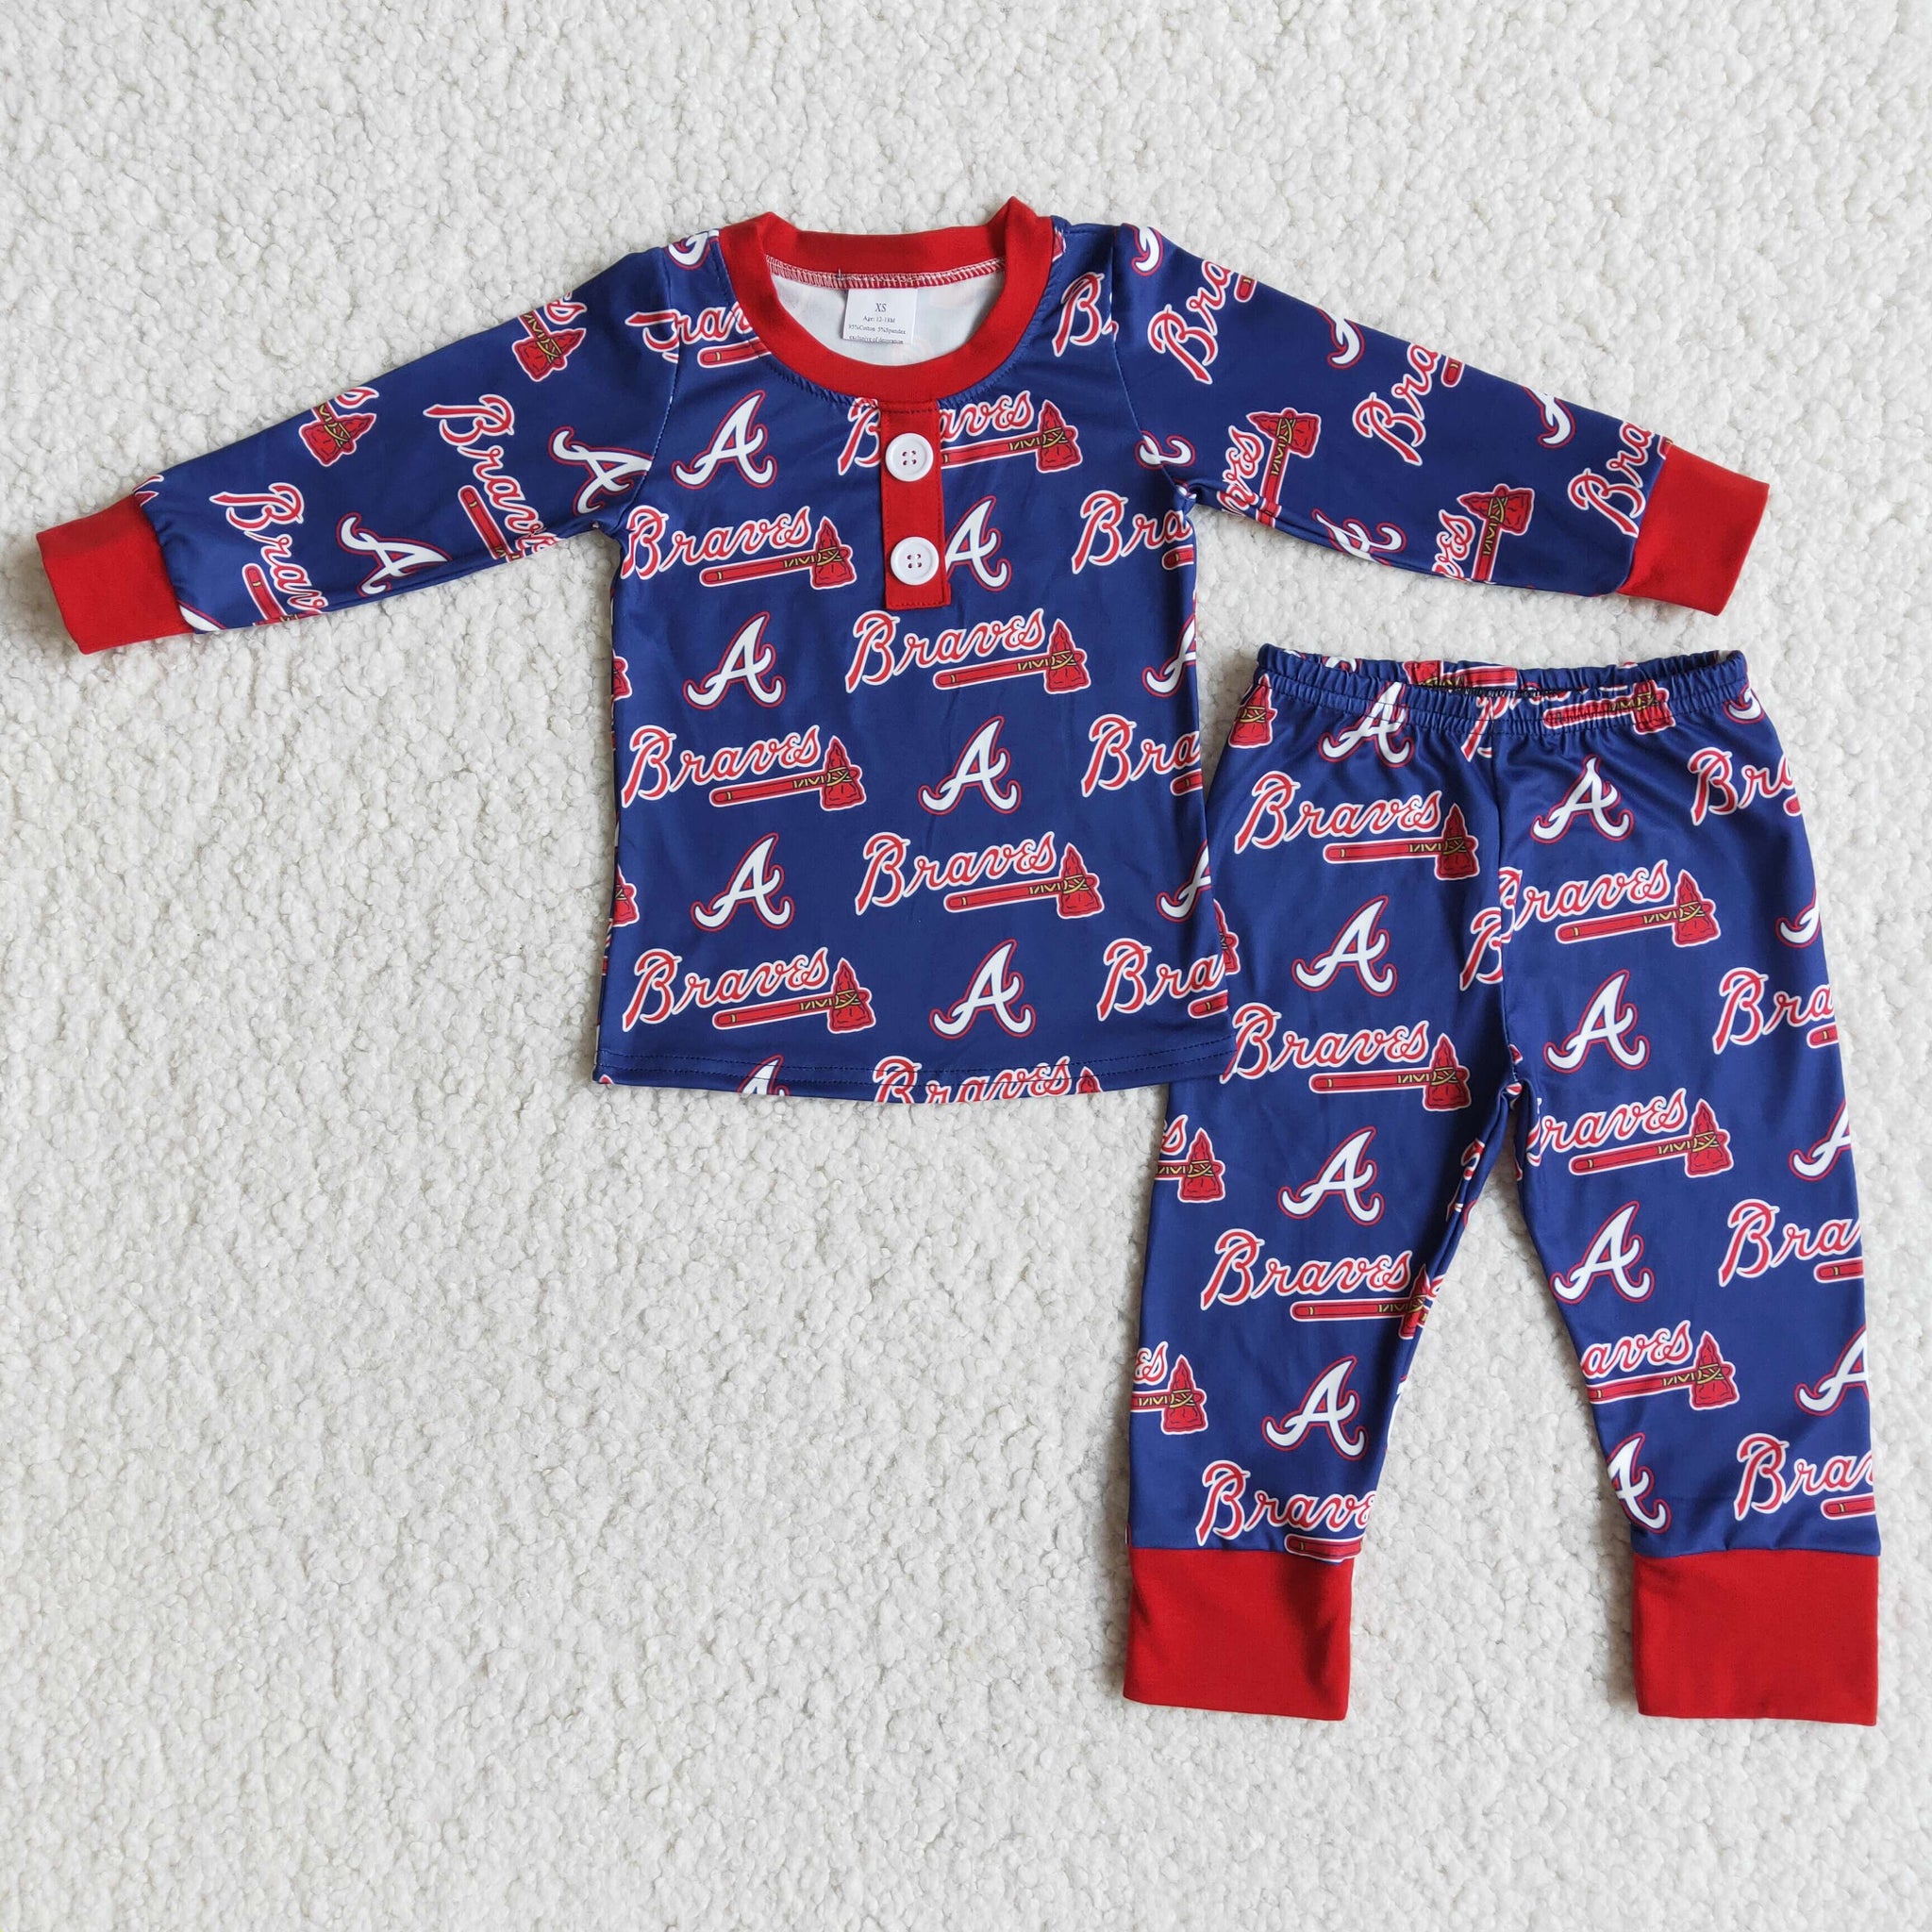 6 A29-19 state A sleepwear pajamas for kids toddler boy outfits